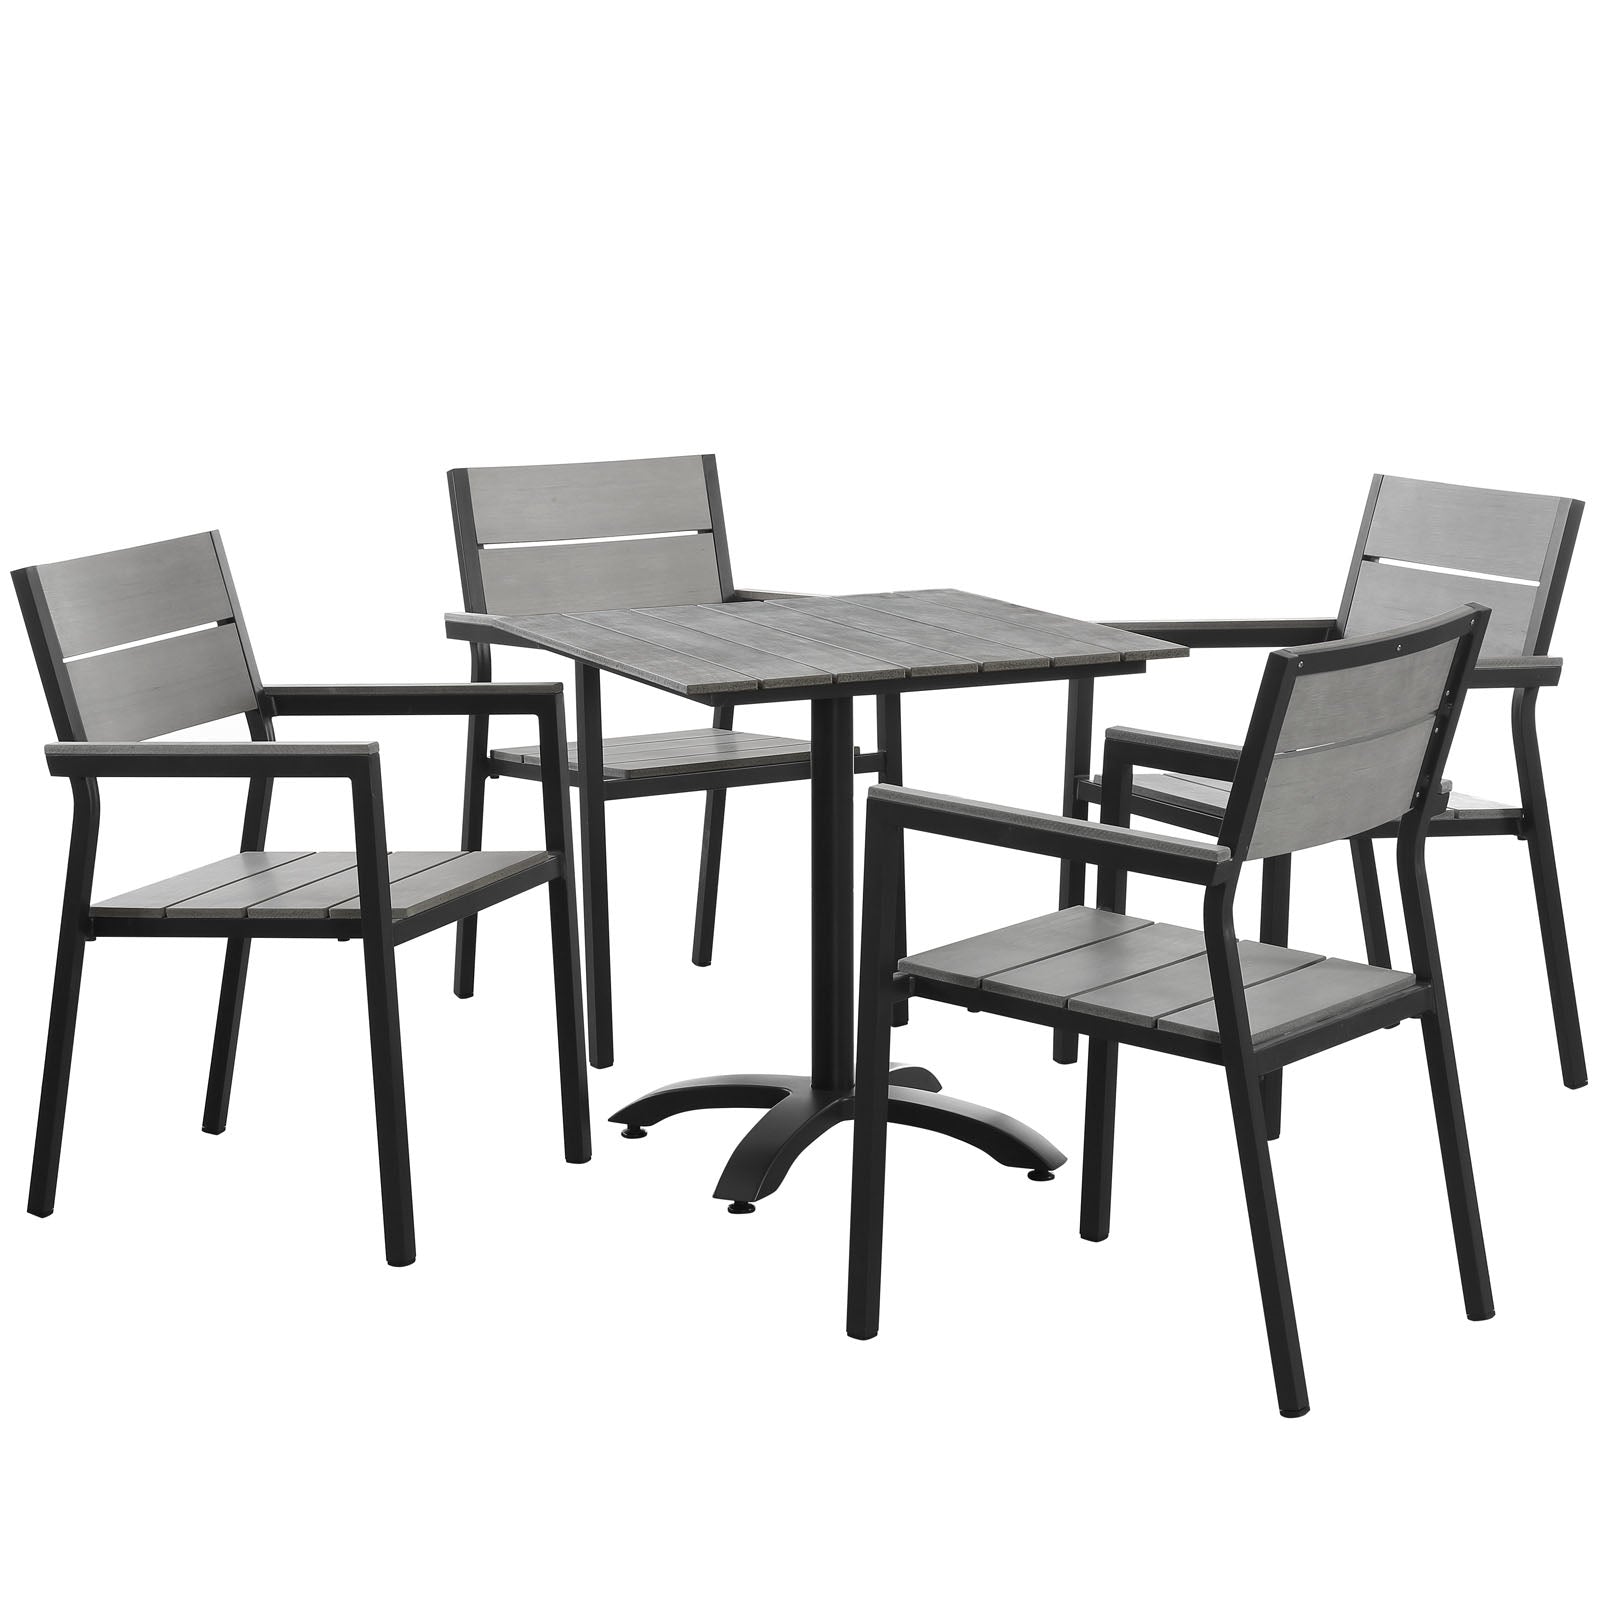 Modway Outdoor Dining Sets - Maine Outdoor Dining Set For 4 Dark Brown & Gray